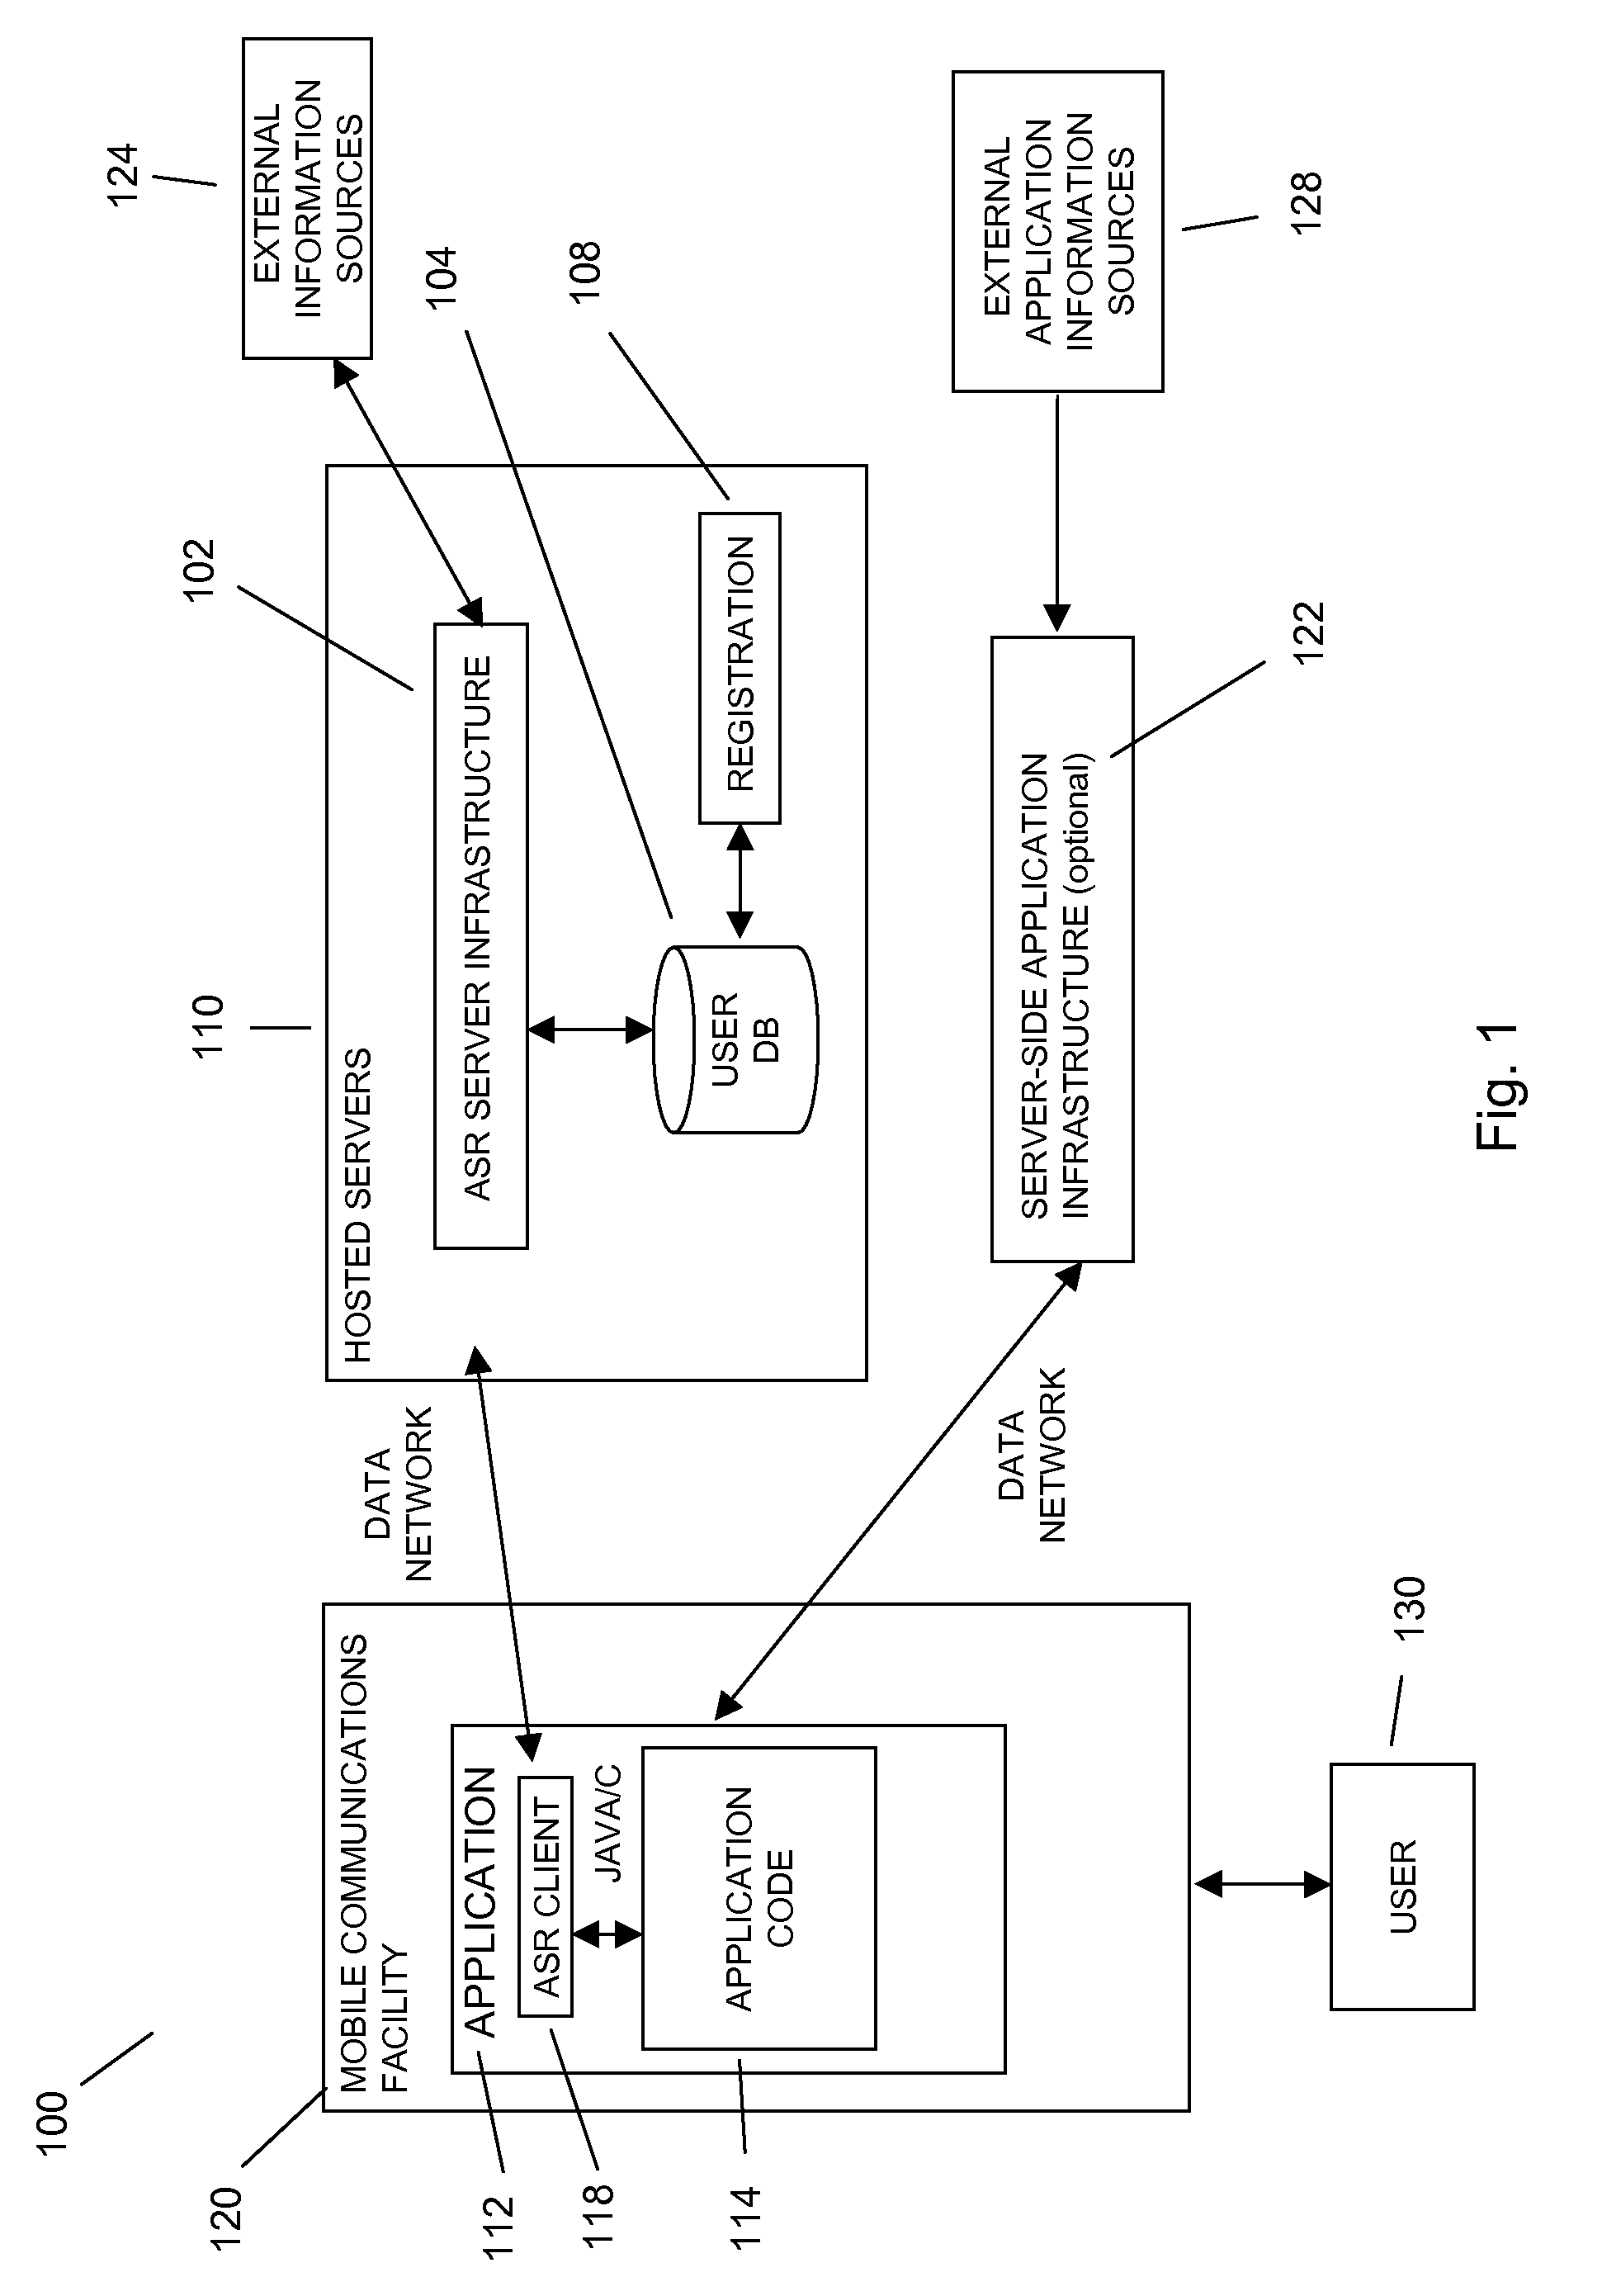 Application text entry in a mobile environment using a speech processing facility